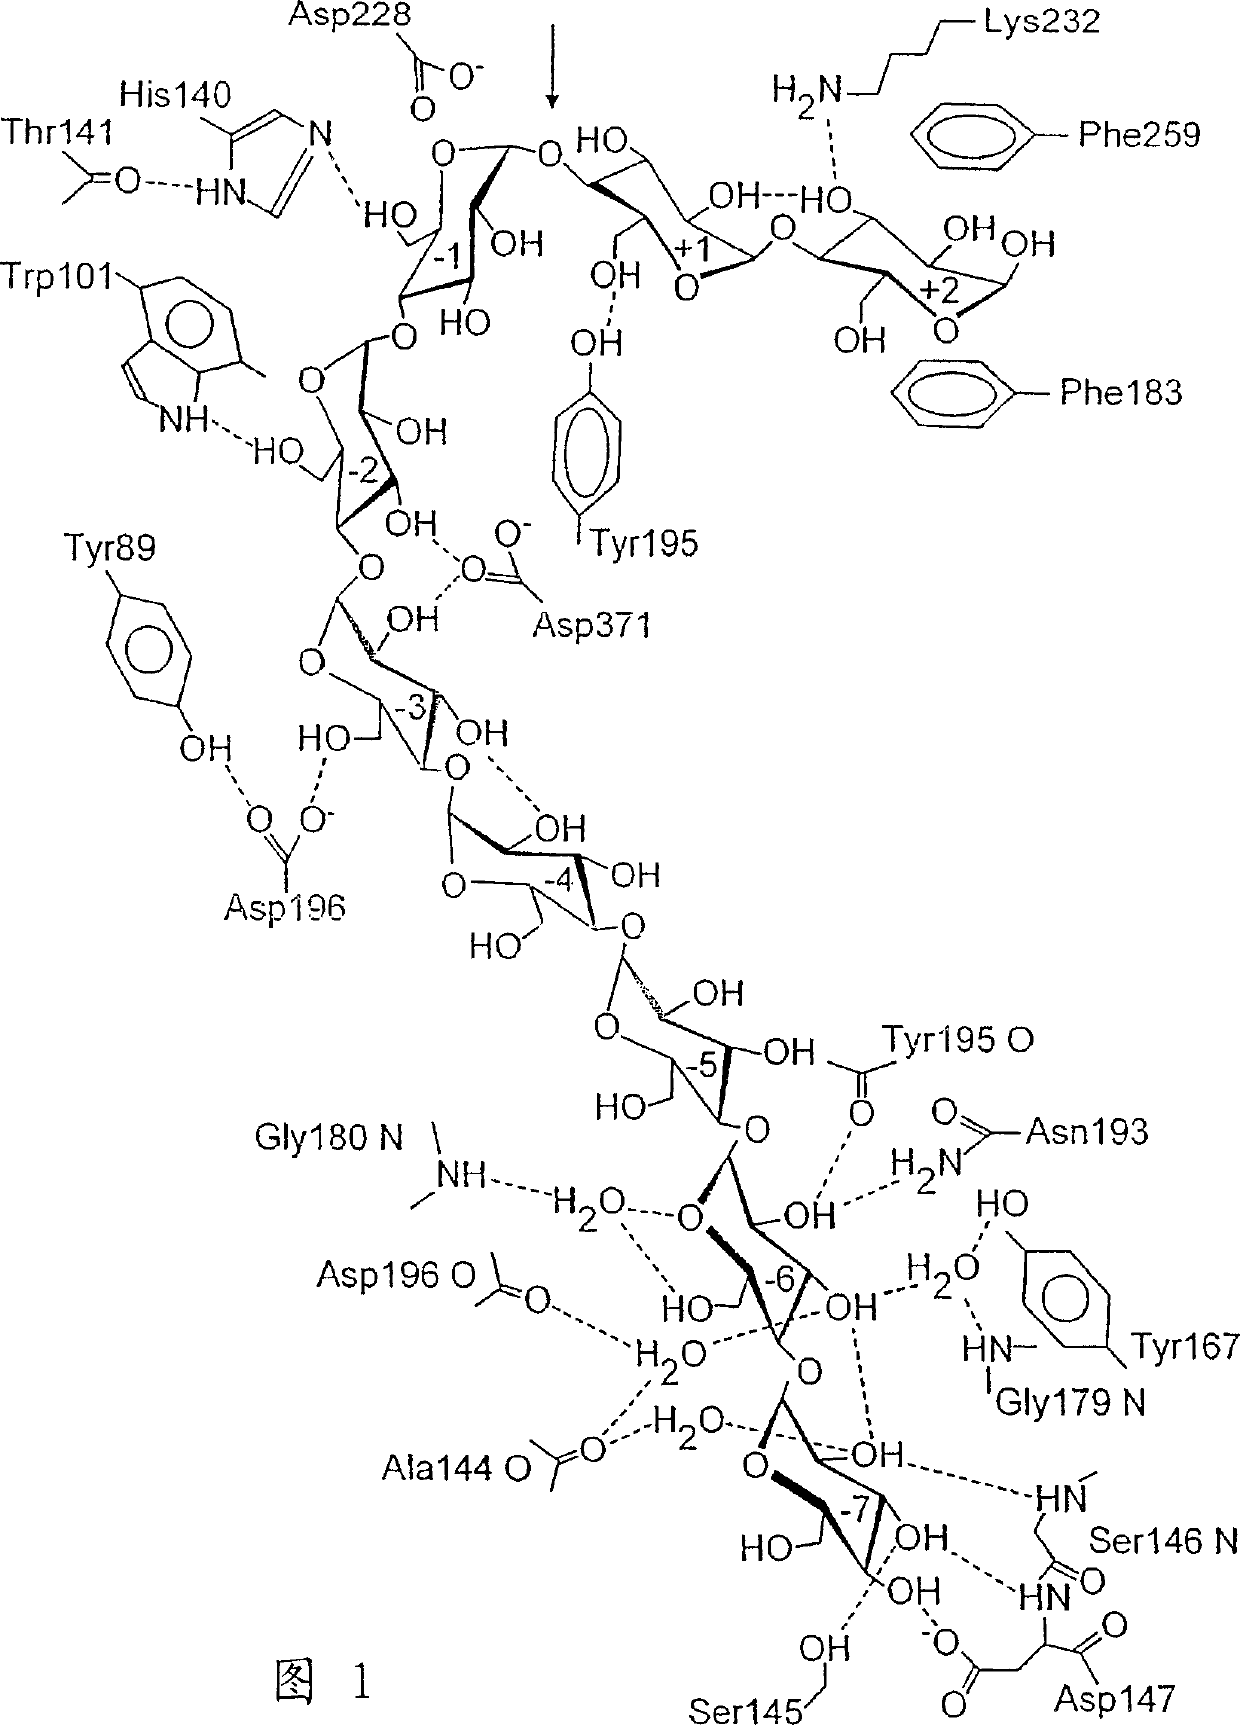 Variants of enzymes of the alpha-amylase family